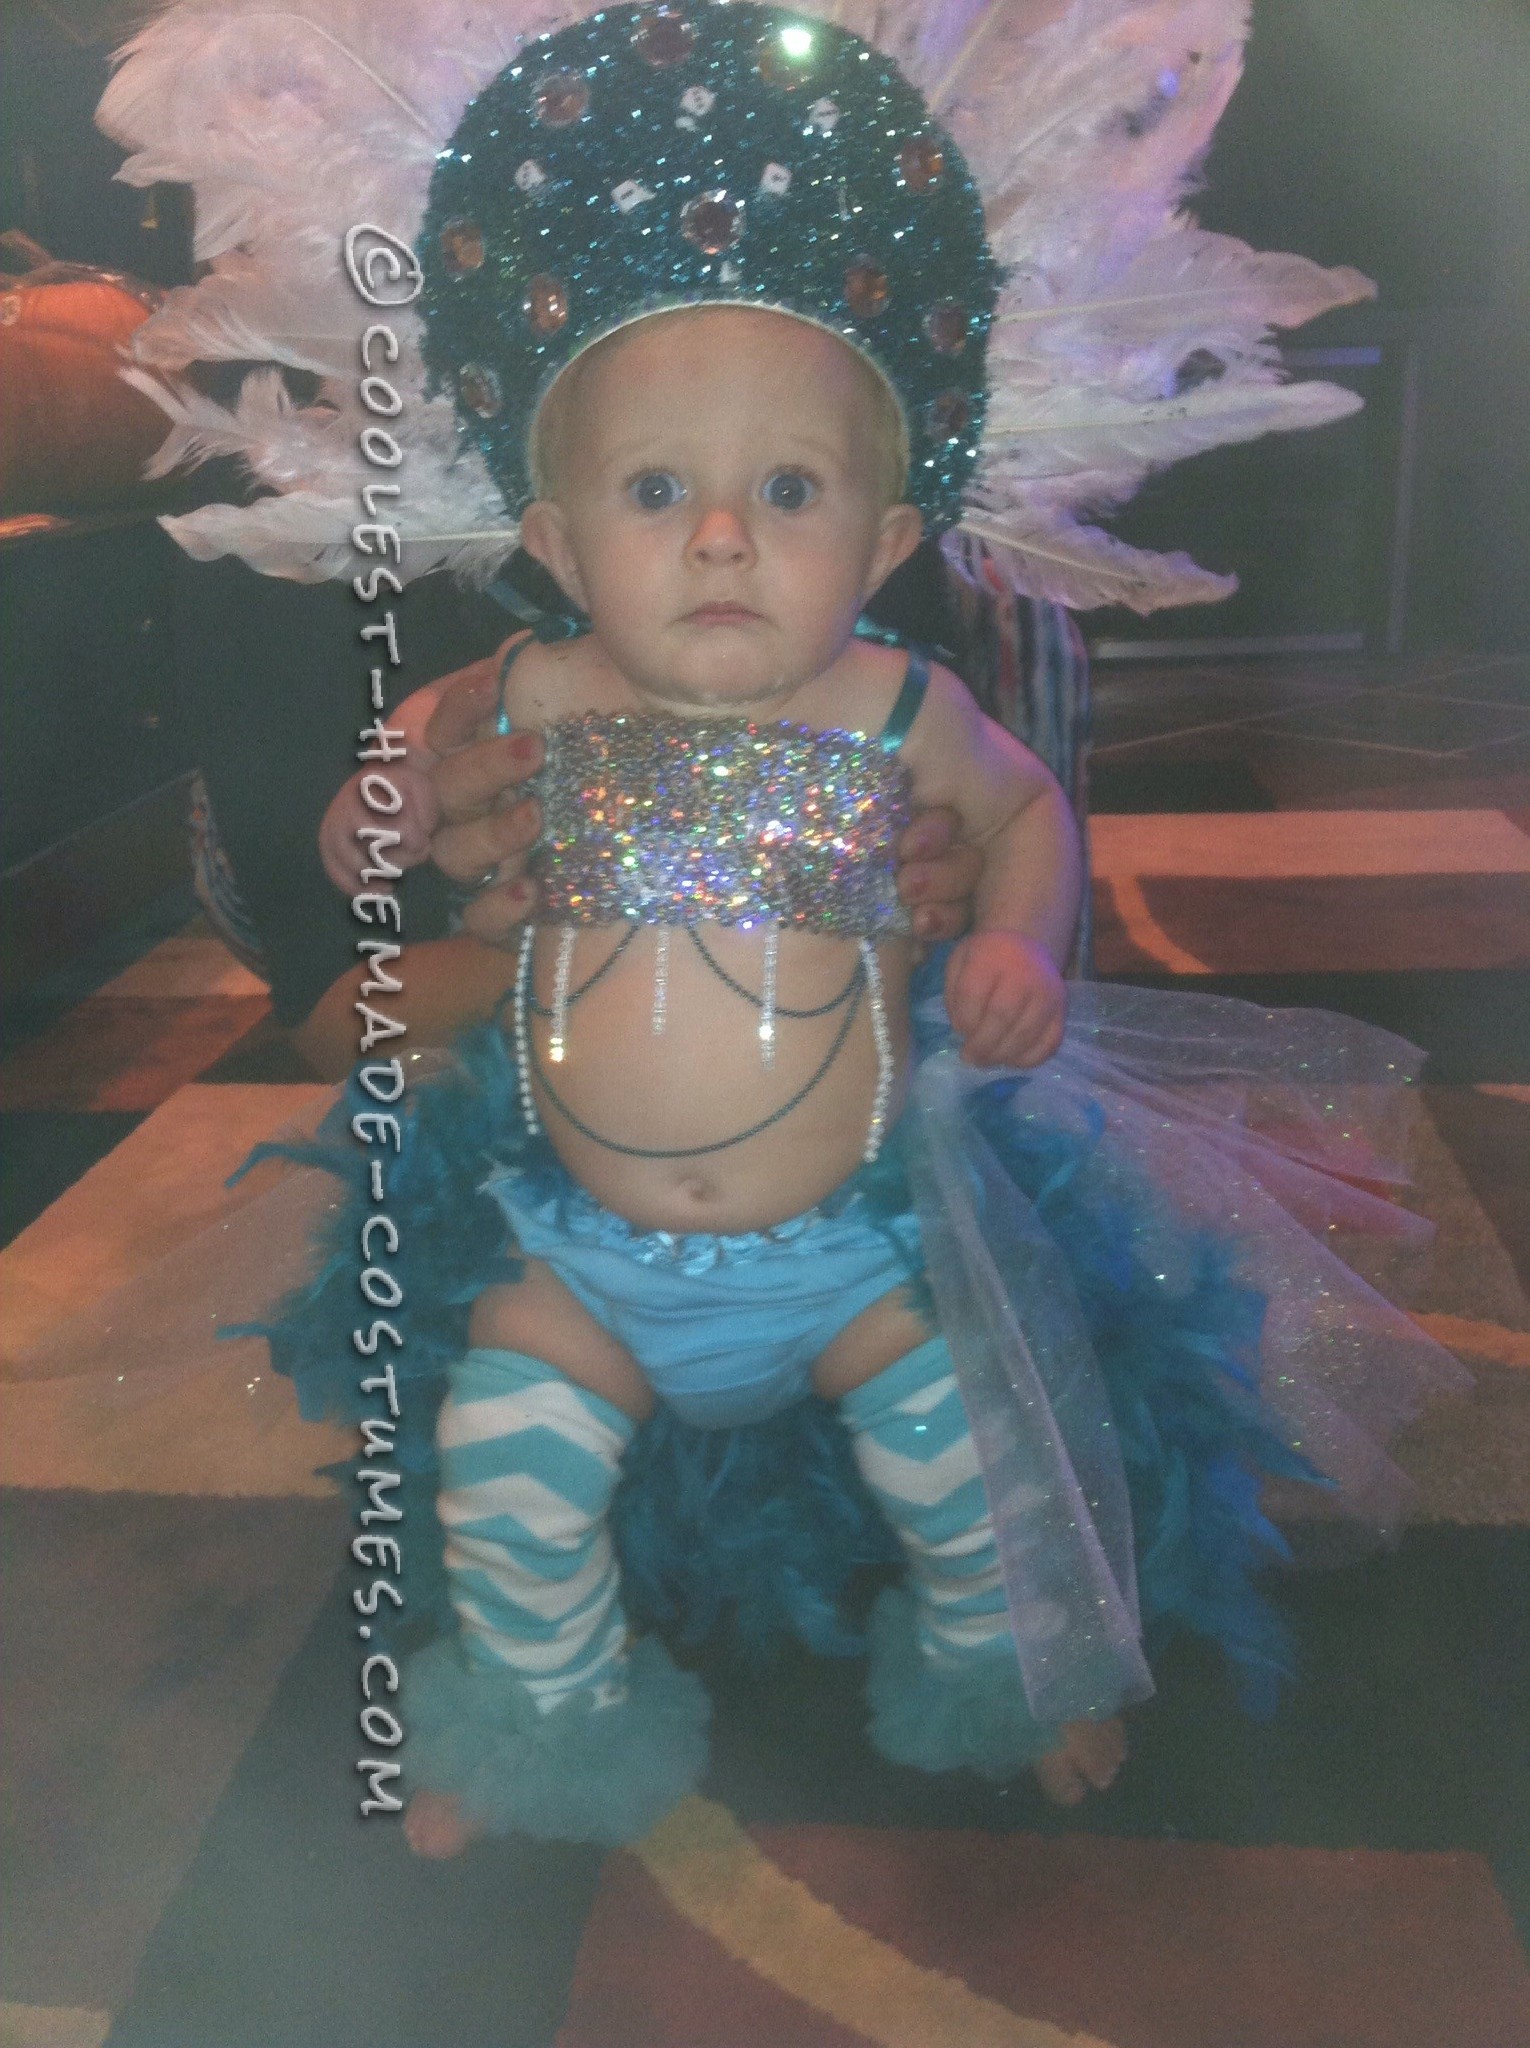 Pint-Sized Las Vegas Show Girl Costume for a Baby